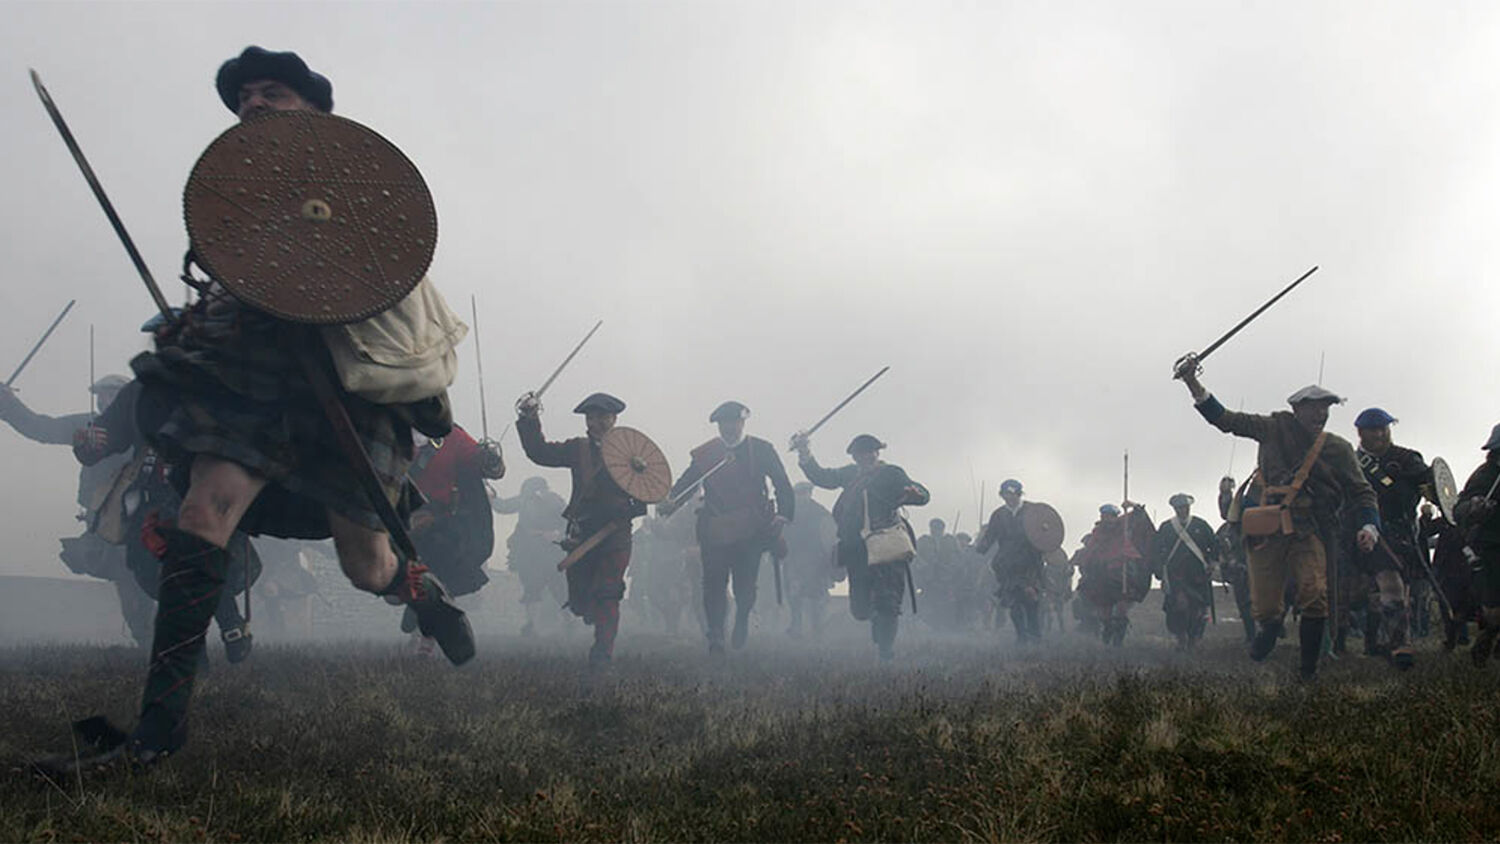 Battle of Prestonpans Feature Page on Undiscovered Scotland